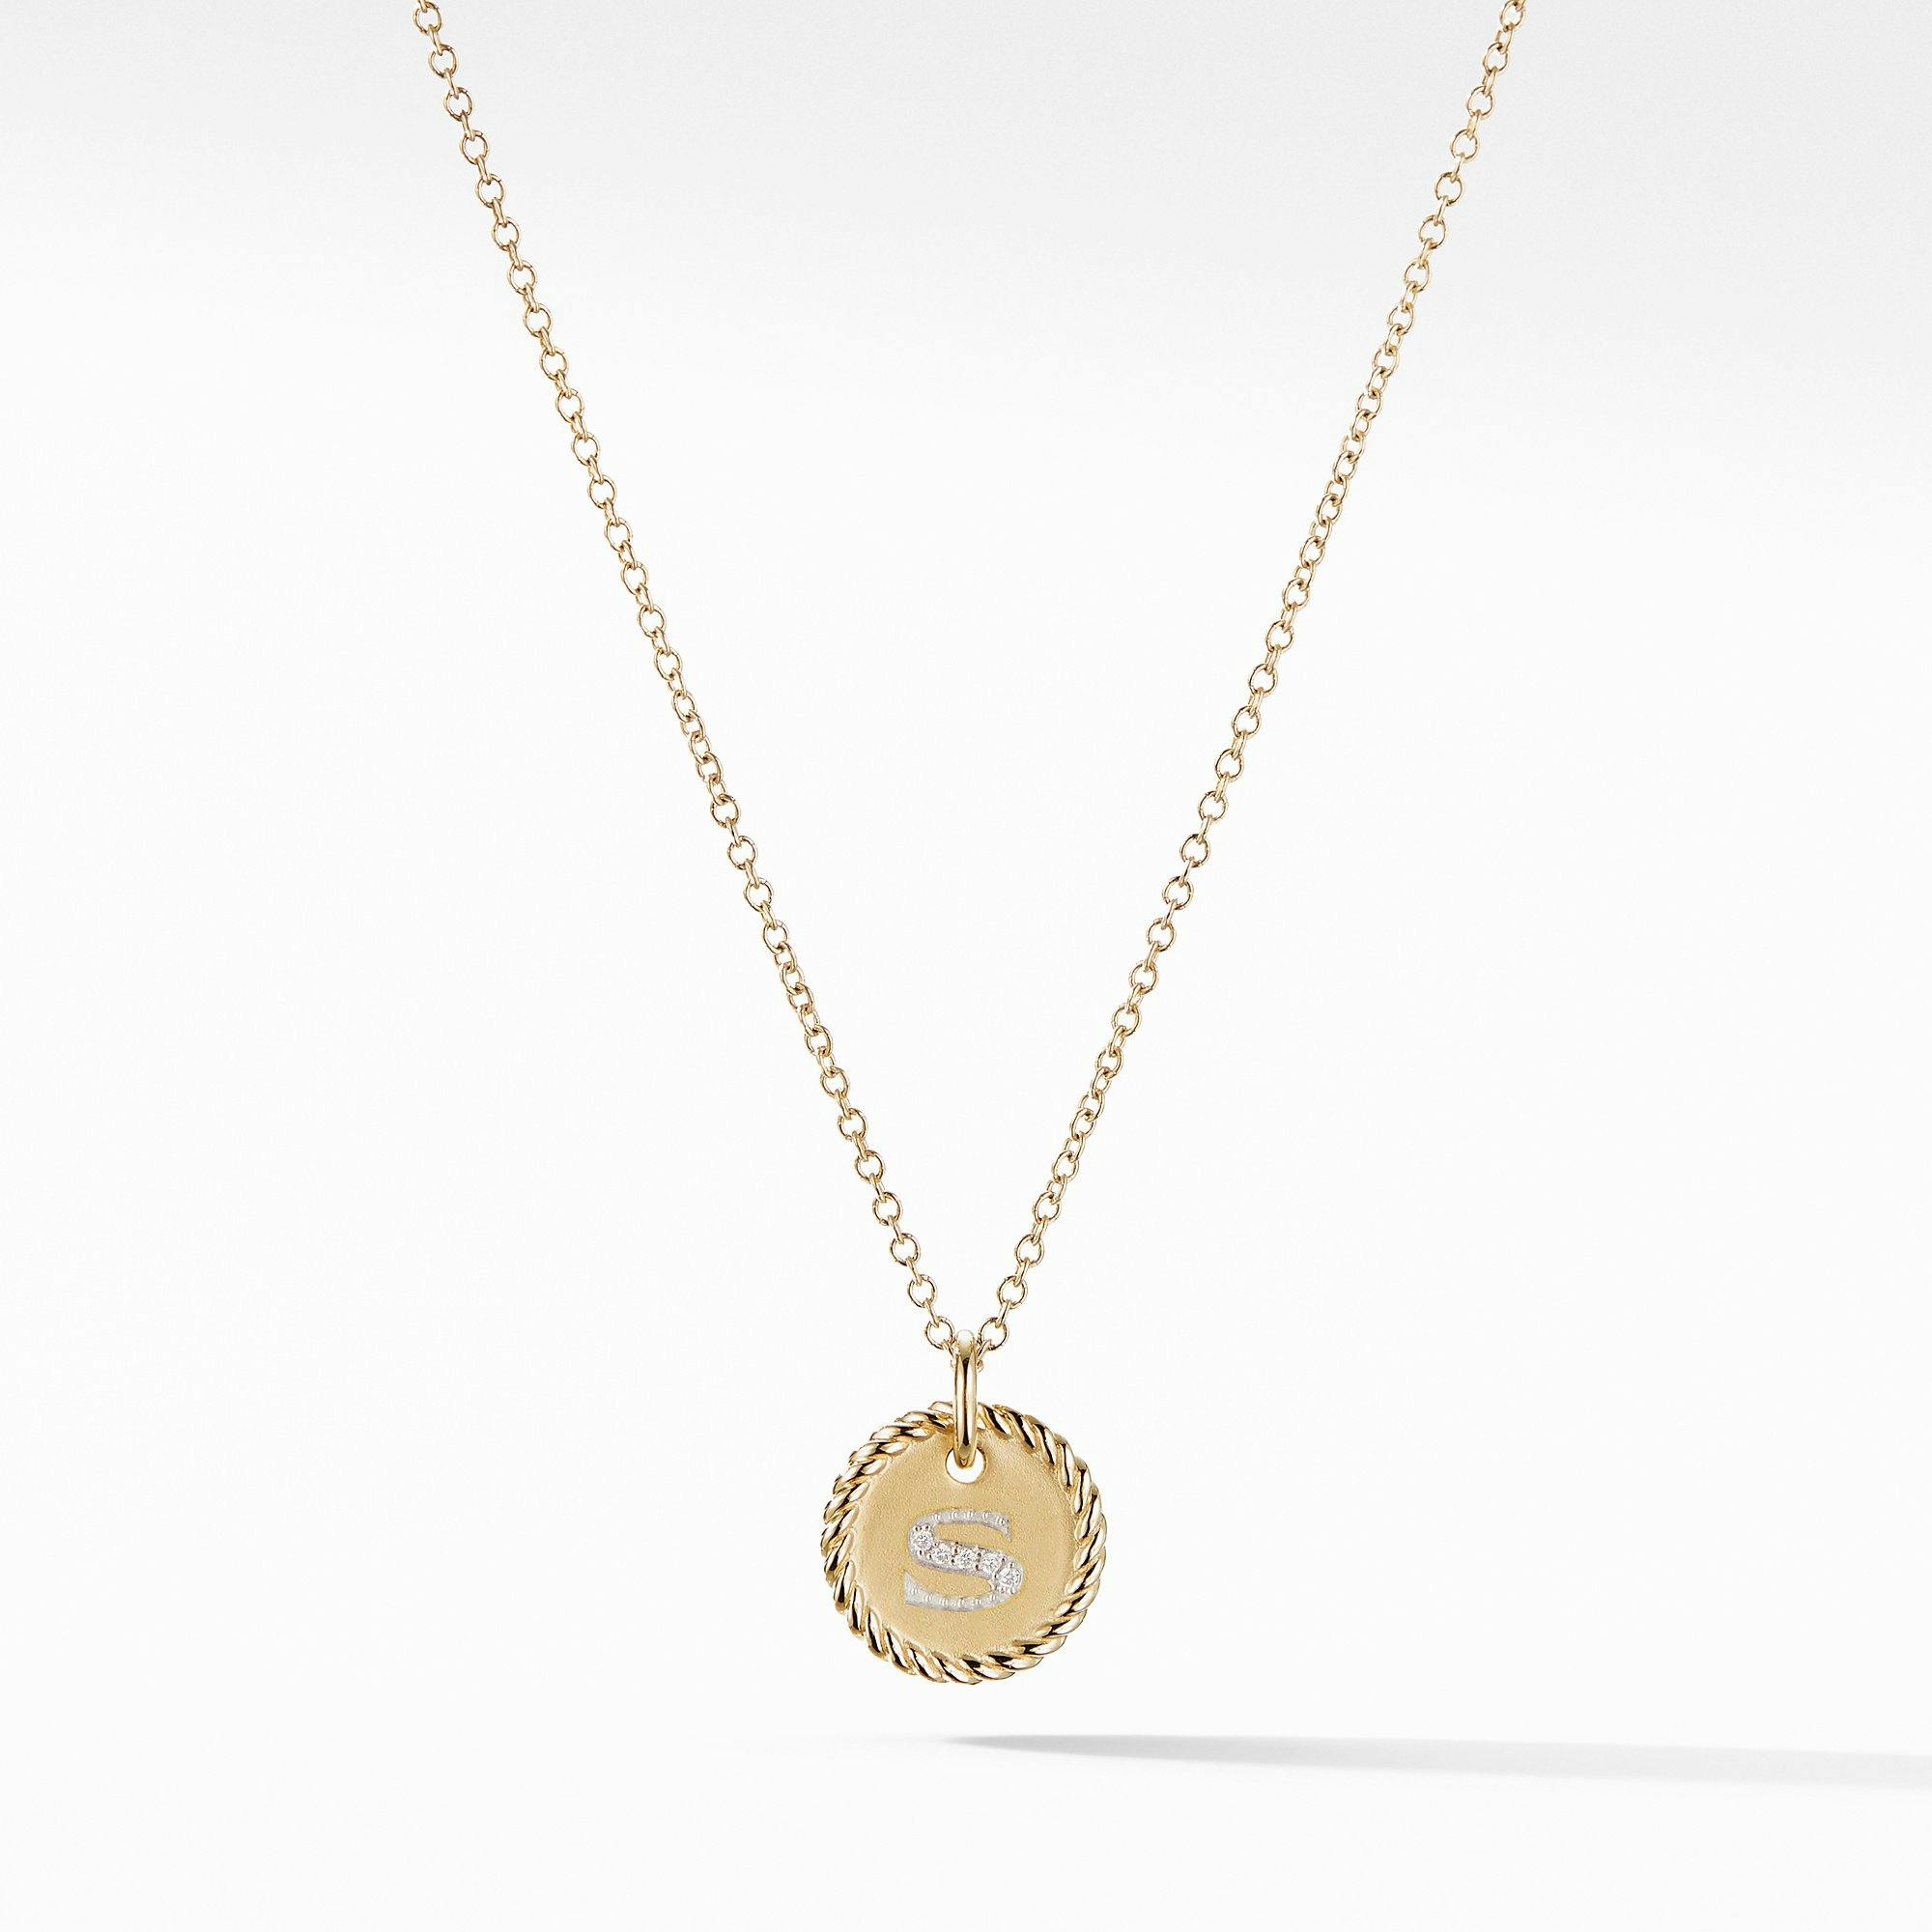 David Yurman "S" Initial Charm Necklace in 18k Yellow Gold with Diamonds